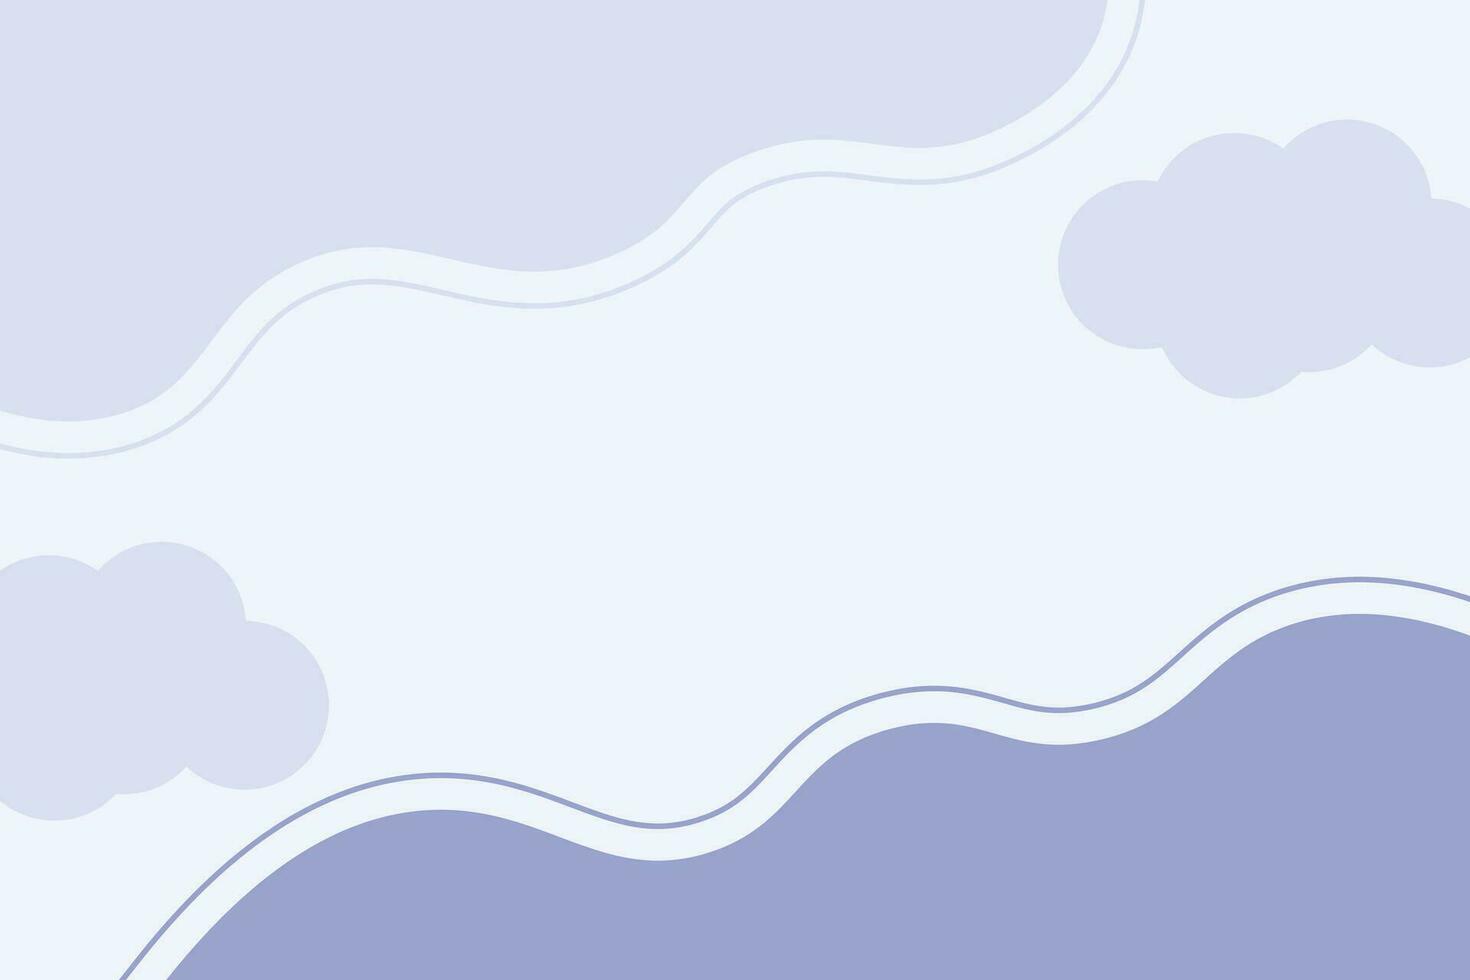 Abstract blue and white clouds background playful and organic design vector